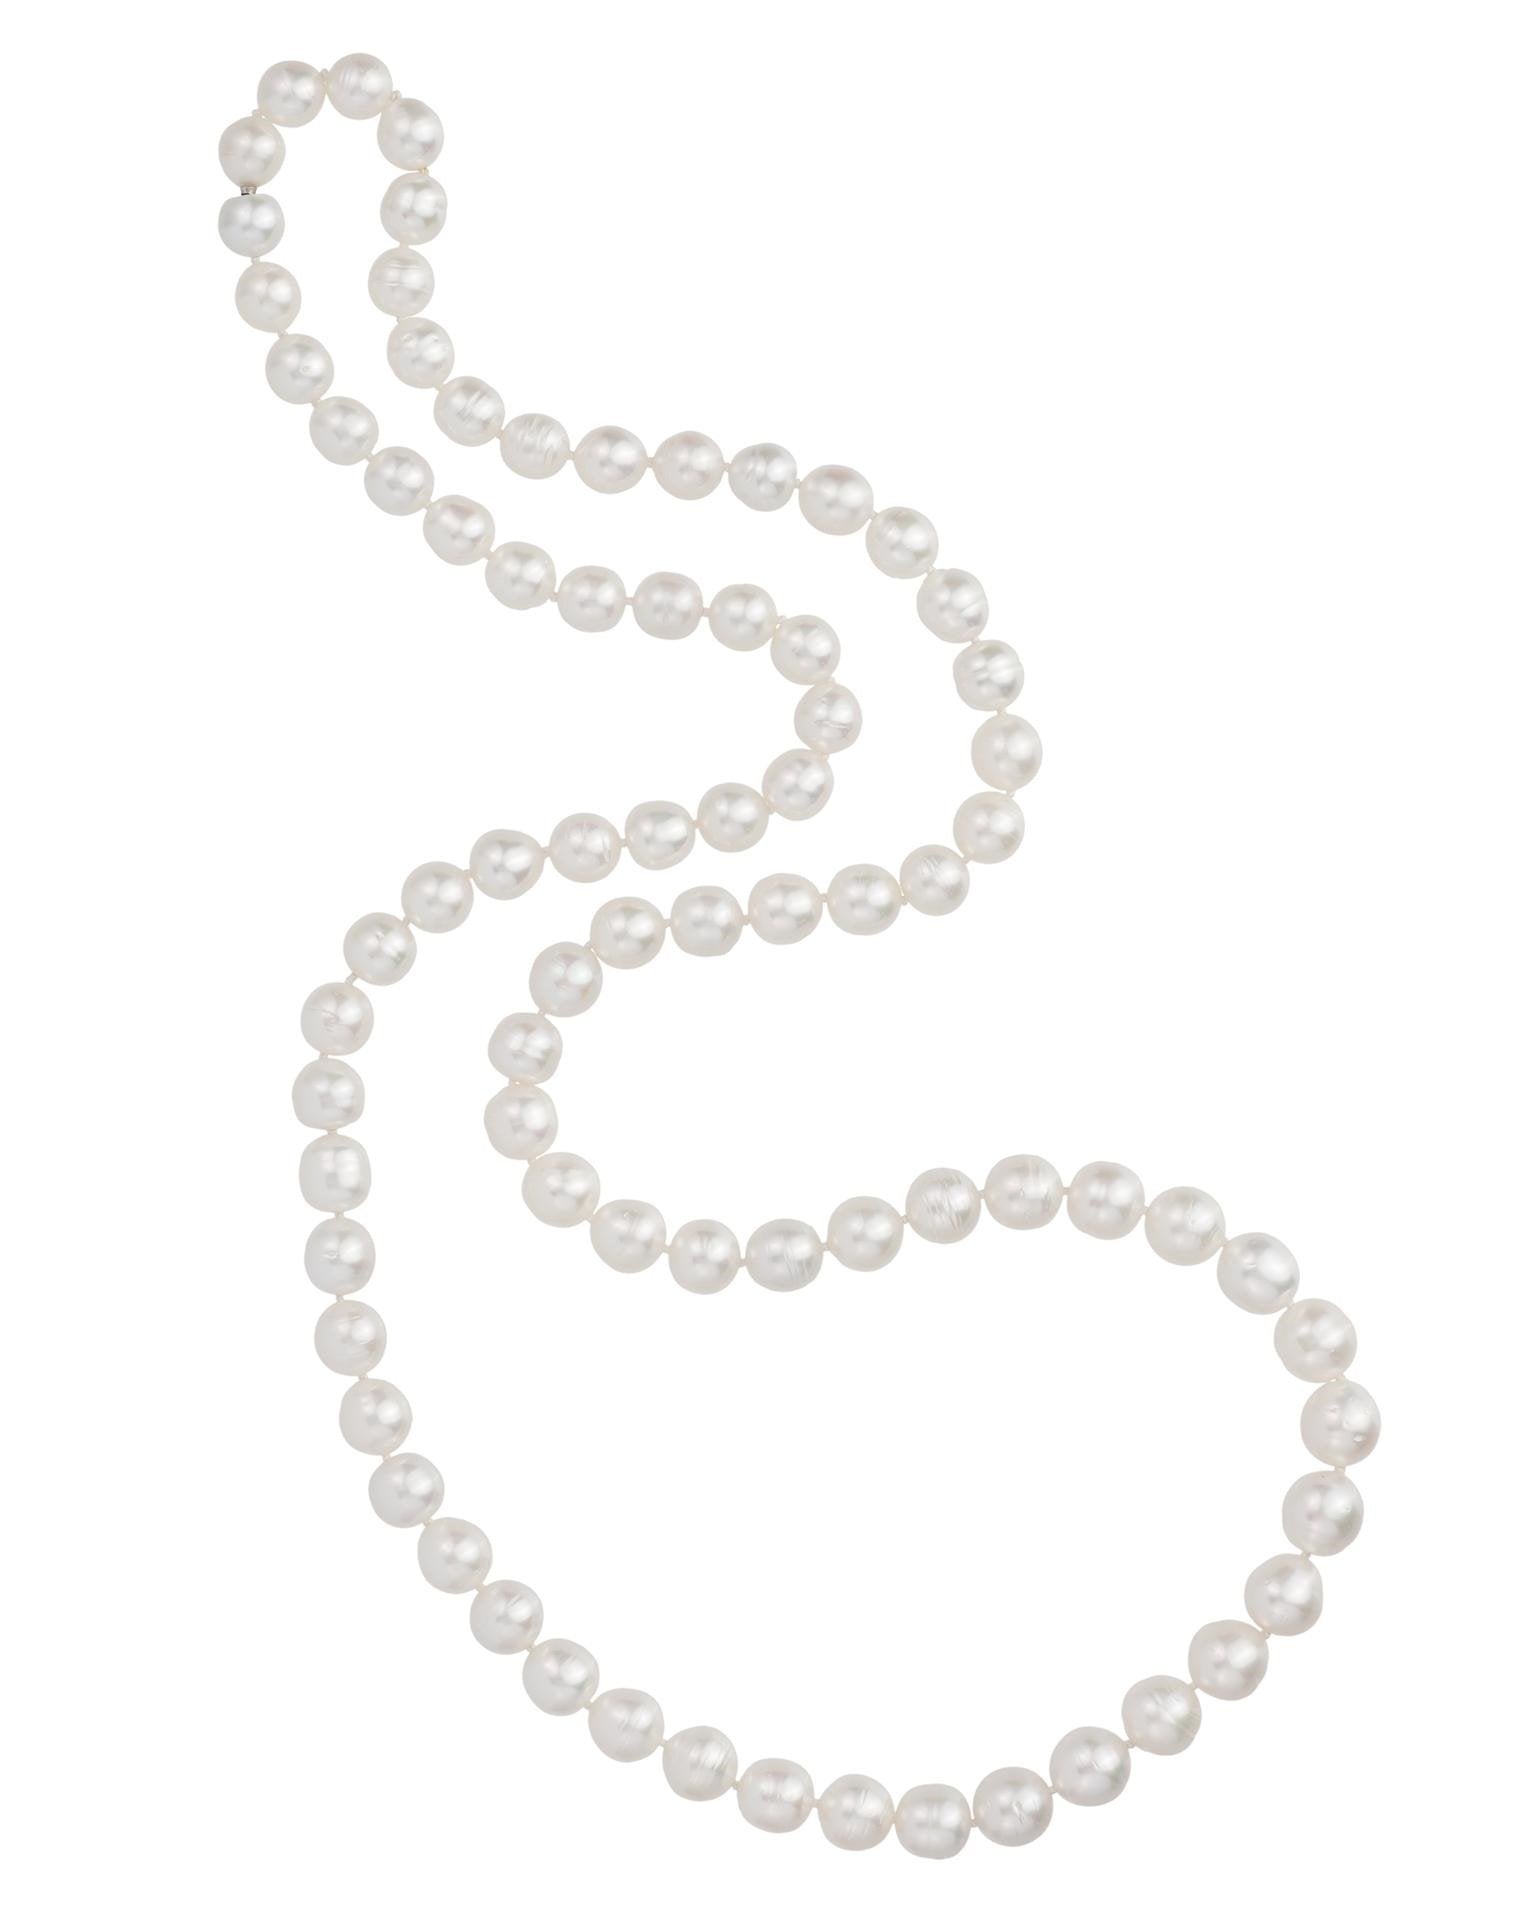 South Sea pearl necklace, featuring a diamond set bayonet clasp, crafted in 18 karat white gold.